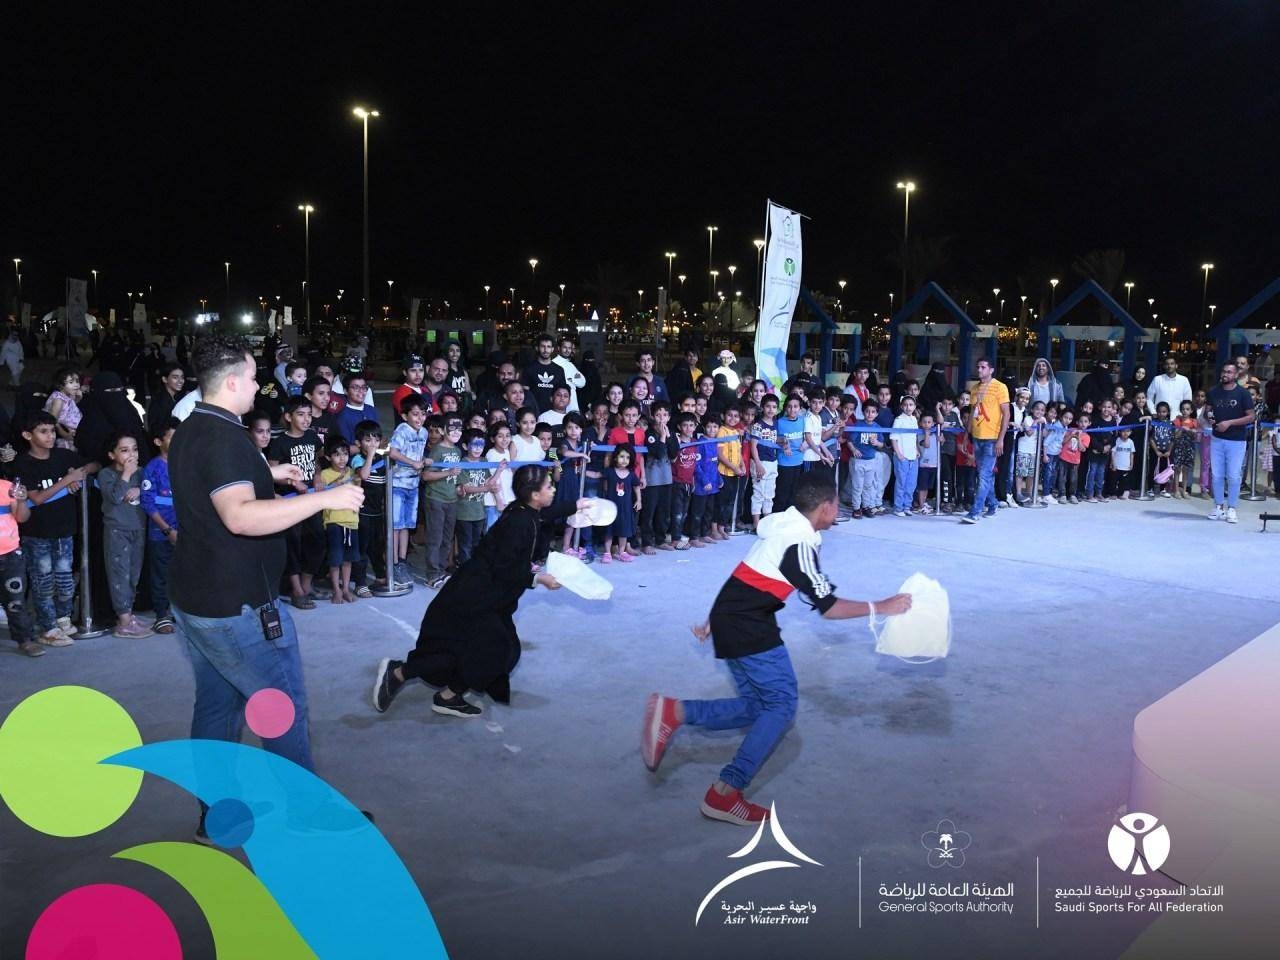 The Asir Waterfront community sports initiative, introduced by the SFA as part of the Vision 2030 Quality of Life program, was designed to be an inclusive and diverse family-friendly event. — Courtesy photo